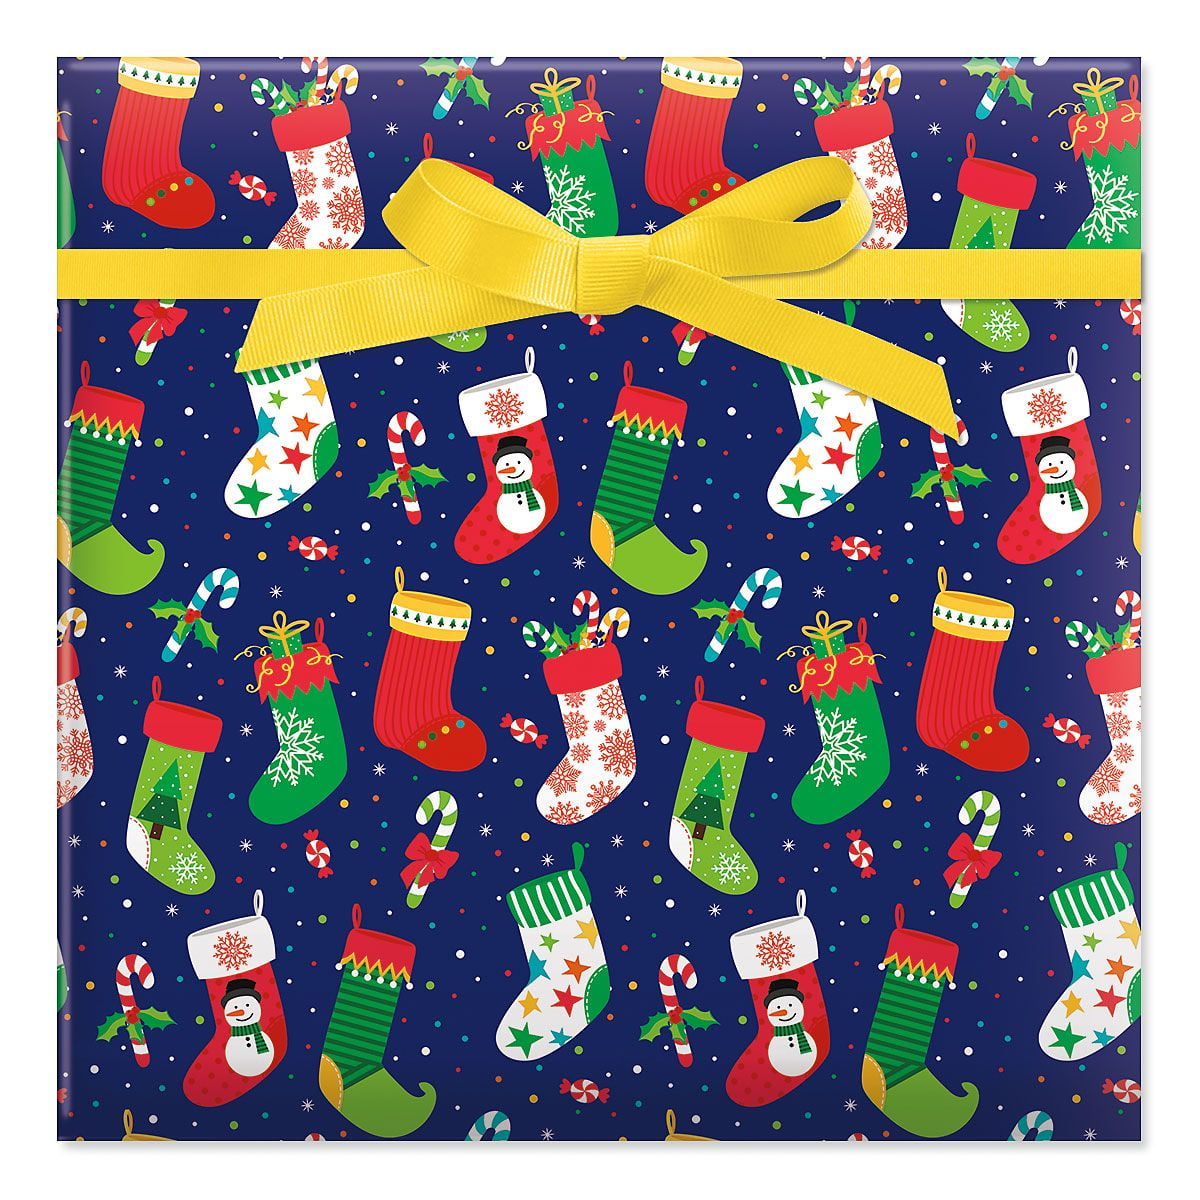 HUNTER GREEN Gift Wrap Wrapping Paper 16 Foot Roll